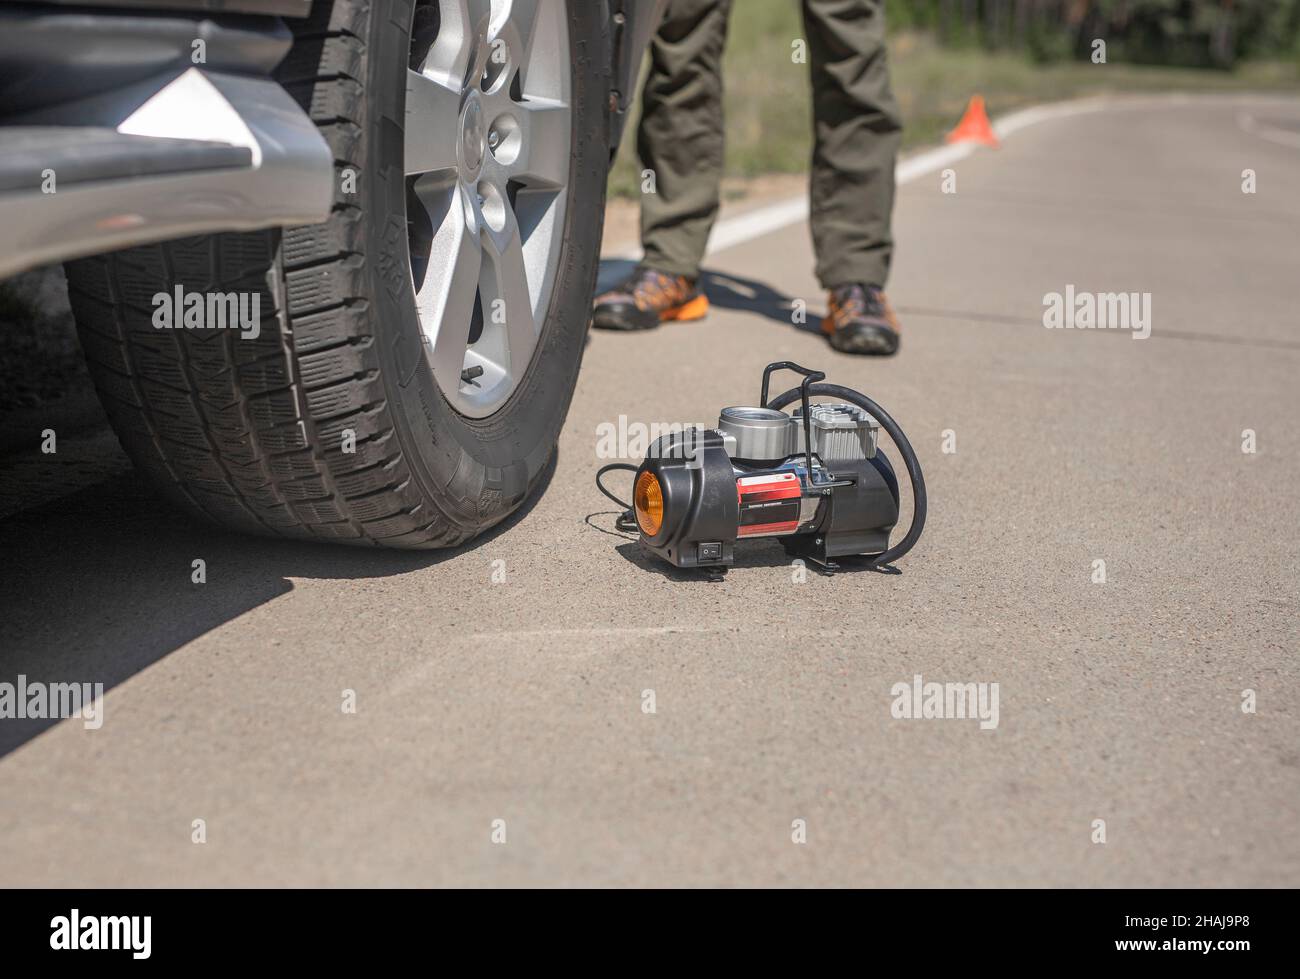 Portable tire pump for inflating car wheel on road. Tyre inflator air compressor with manometer. Stock Photo